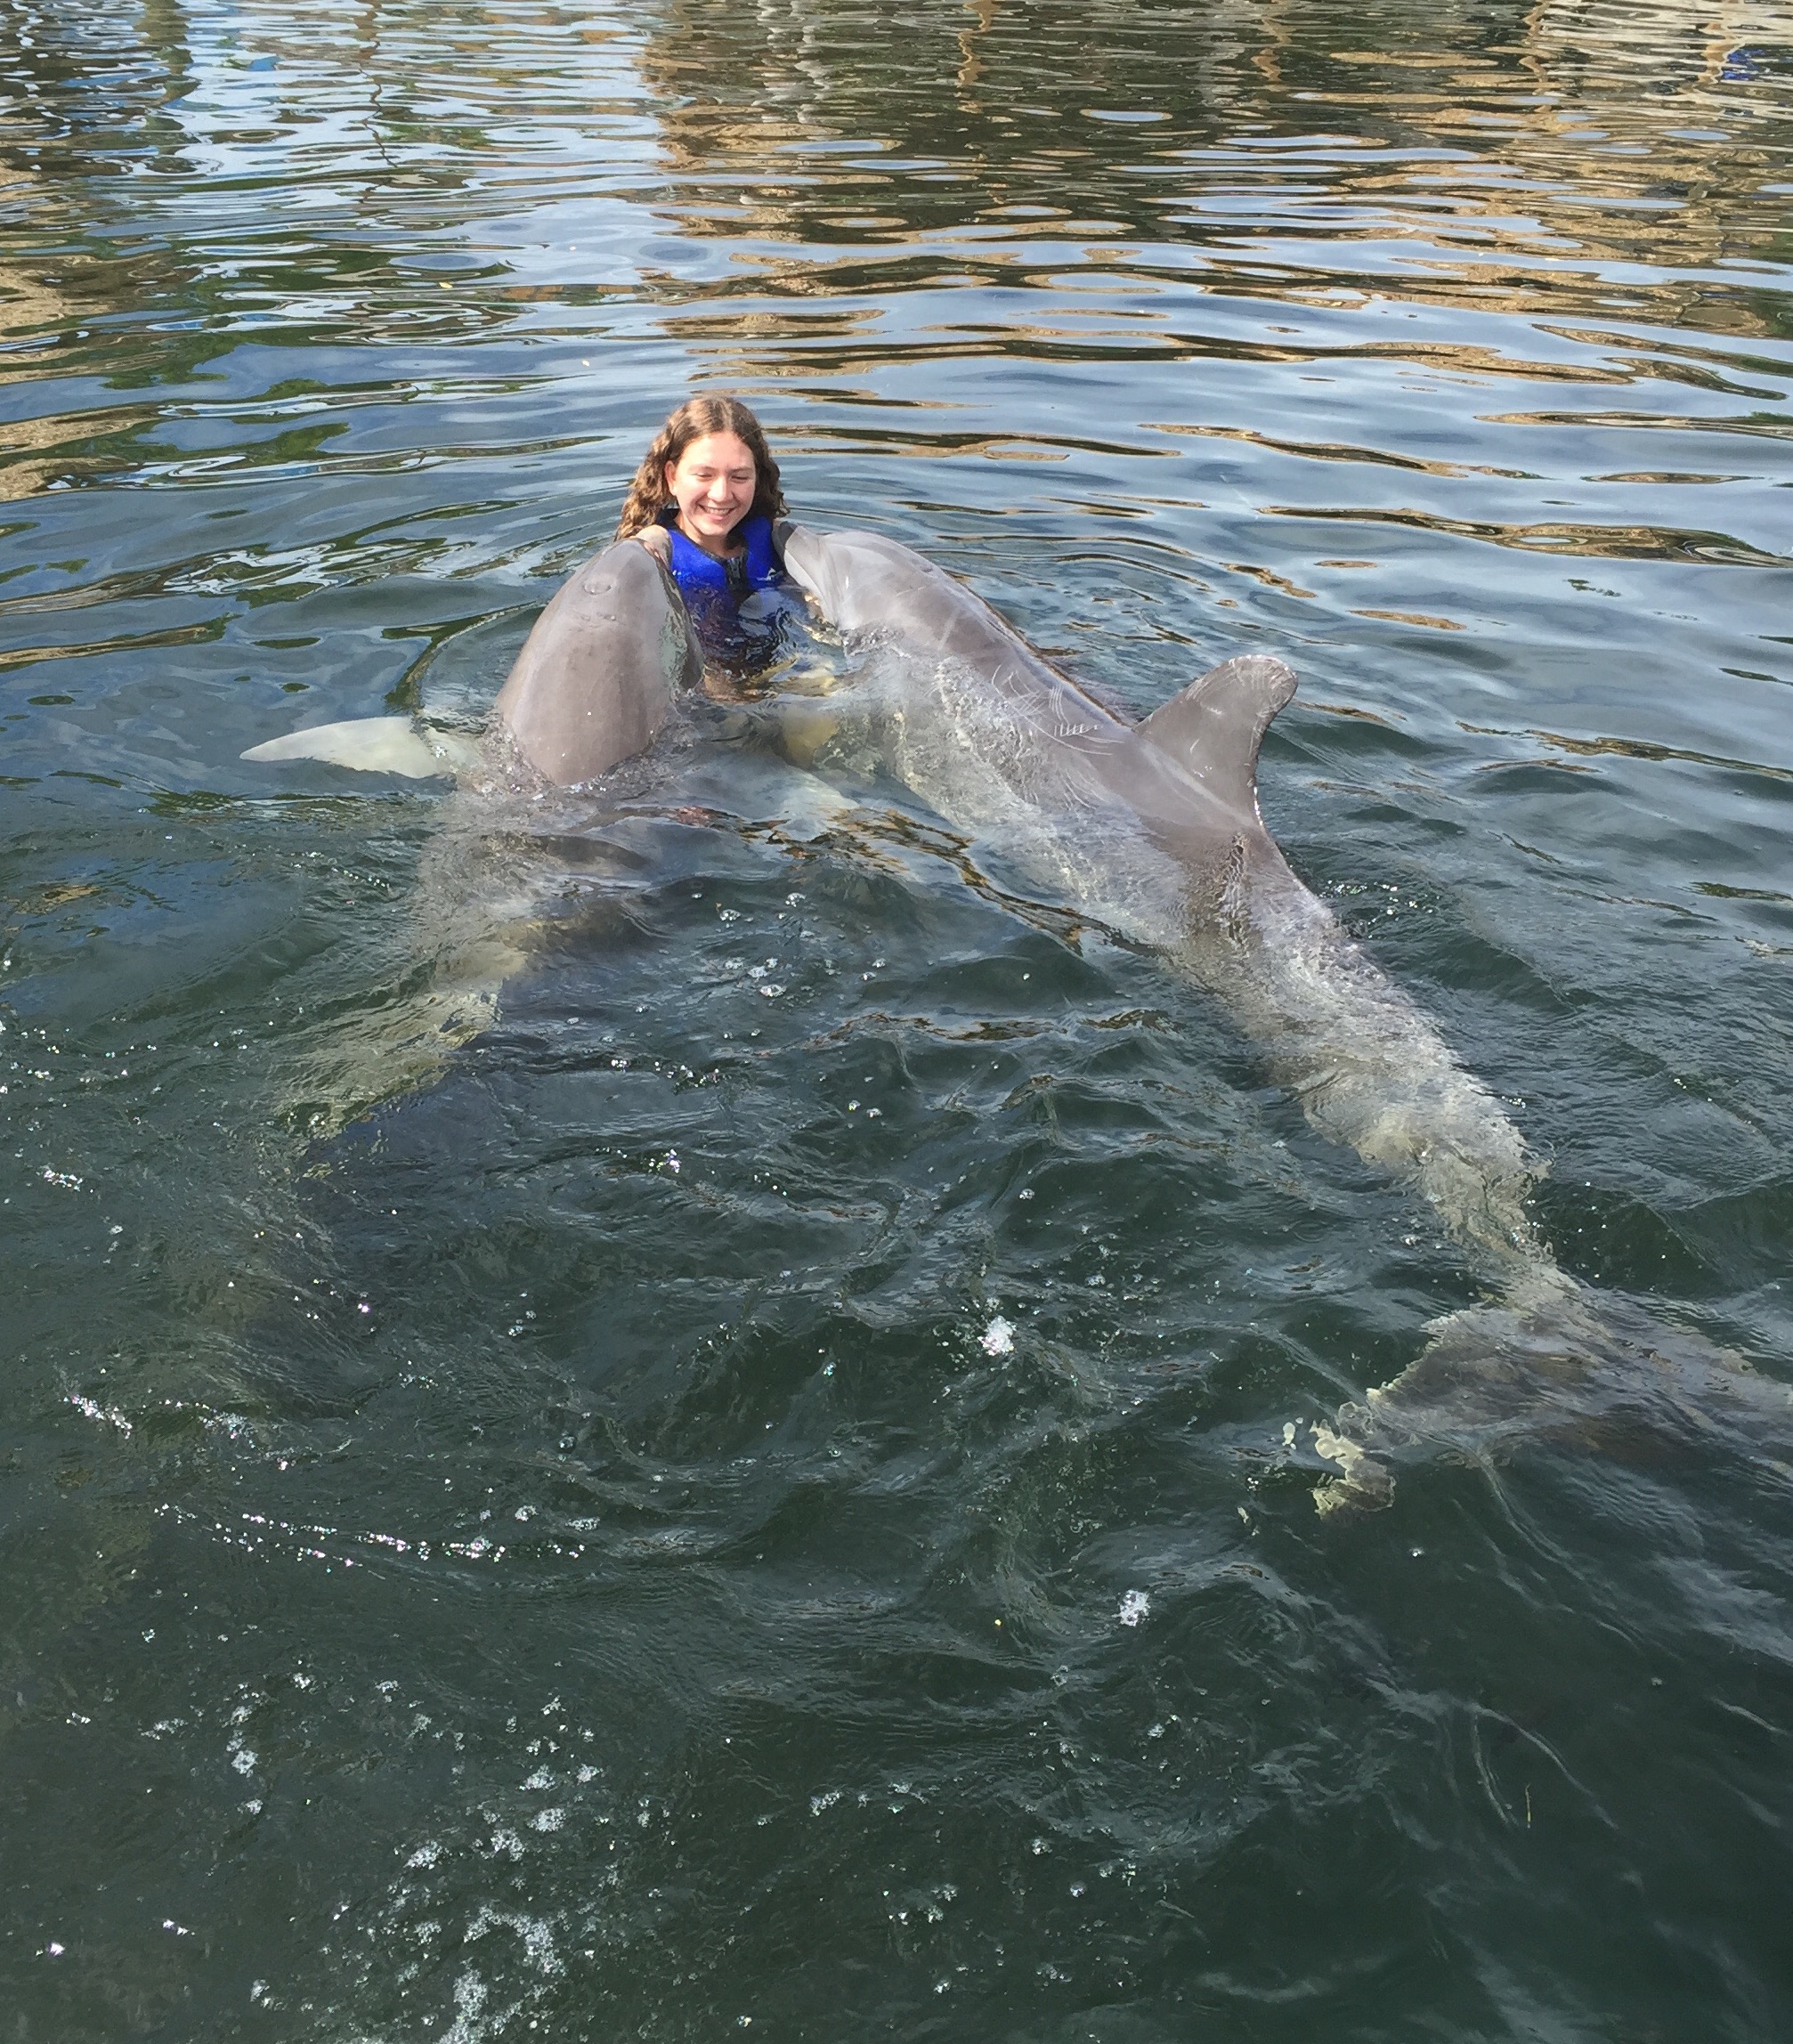 Michelle with two dolphins